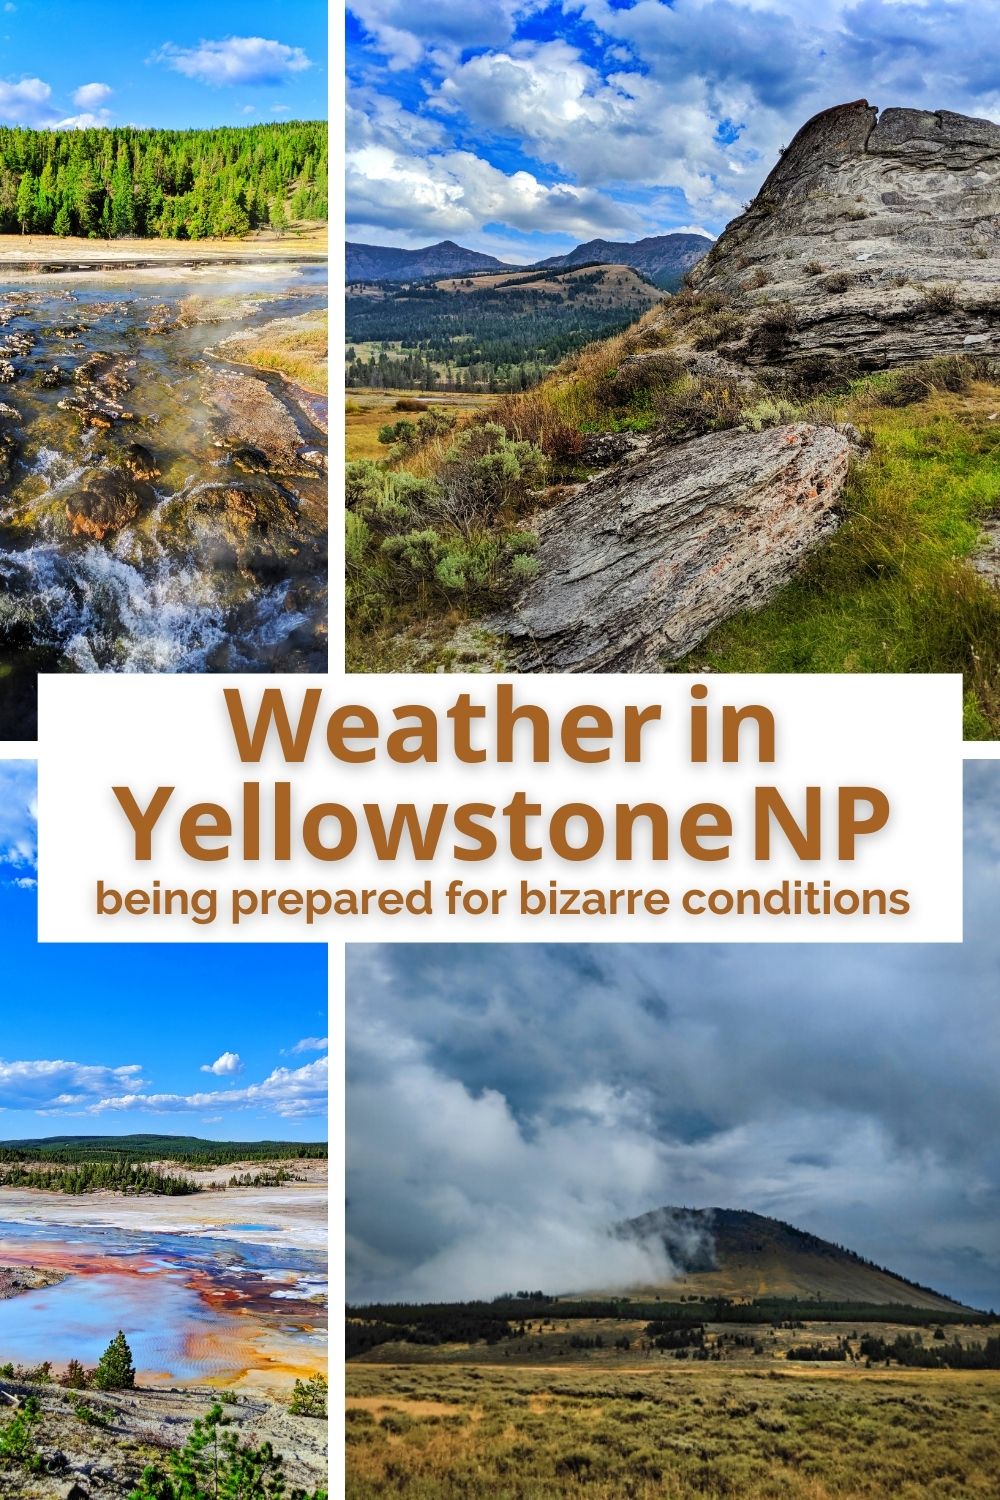 The weather in Yellowstone National Park can really vary from day to day, even in the summer. See what to expect and how to properly prepare for ever-changing conditions in Yellowstone.